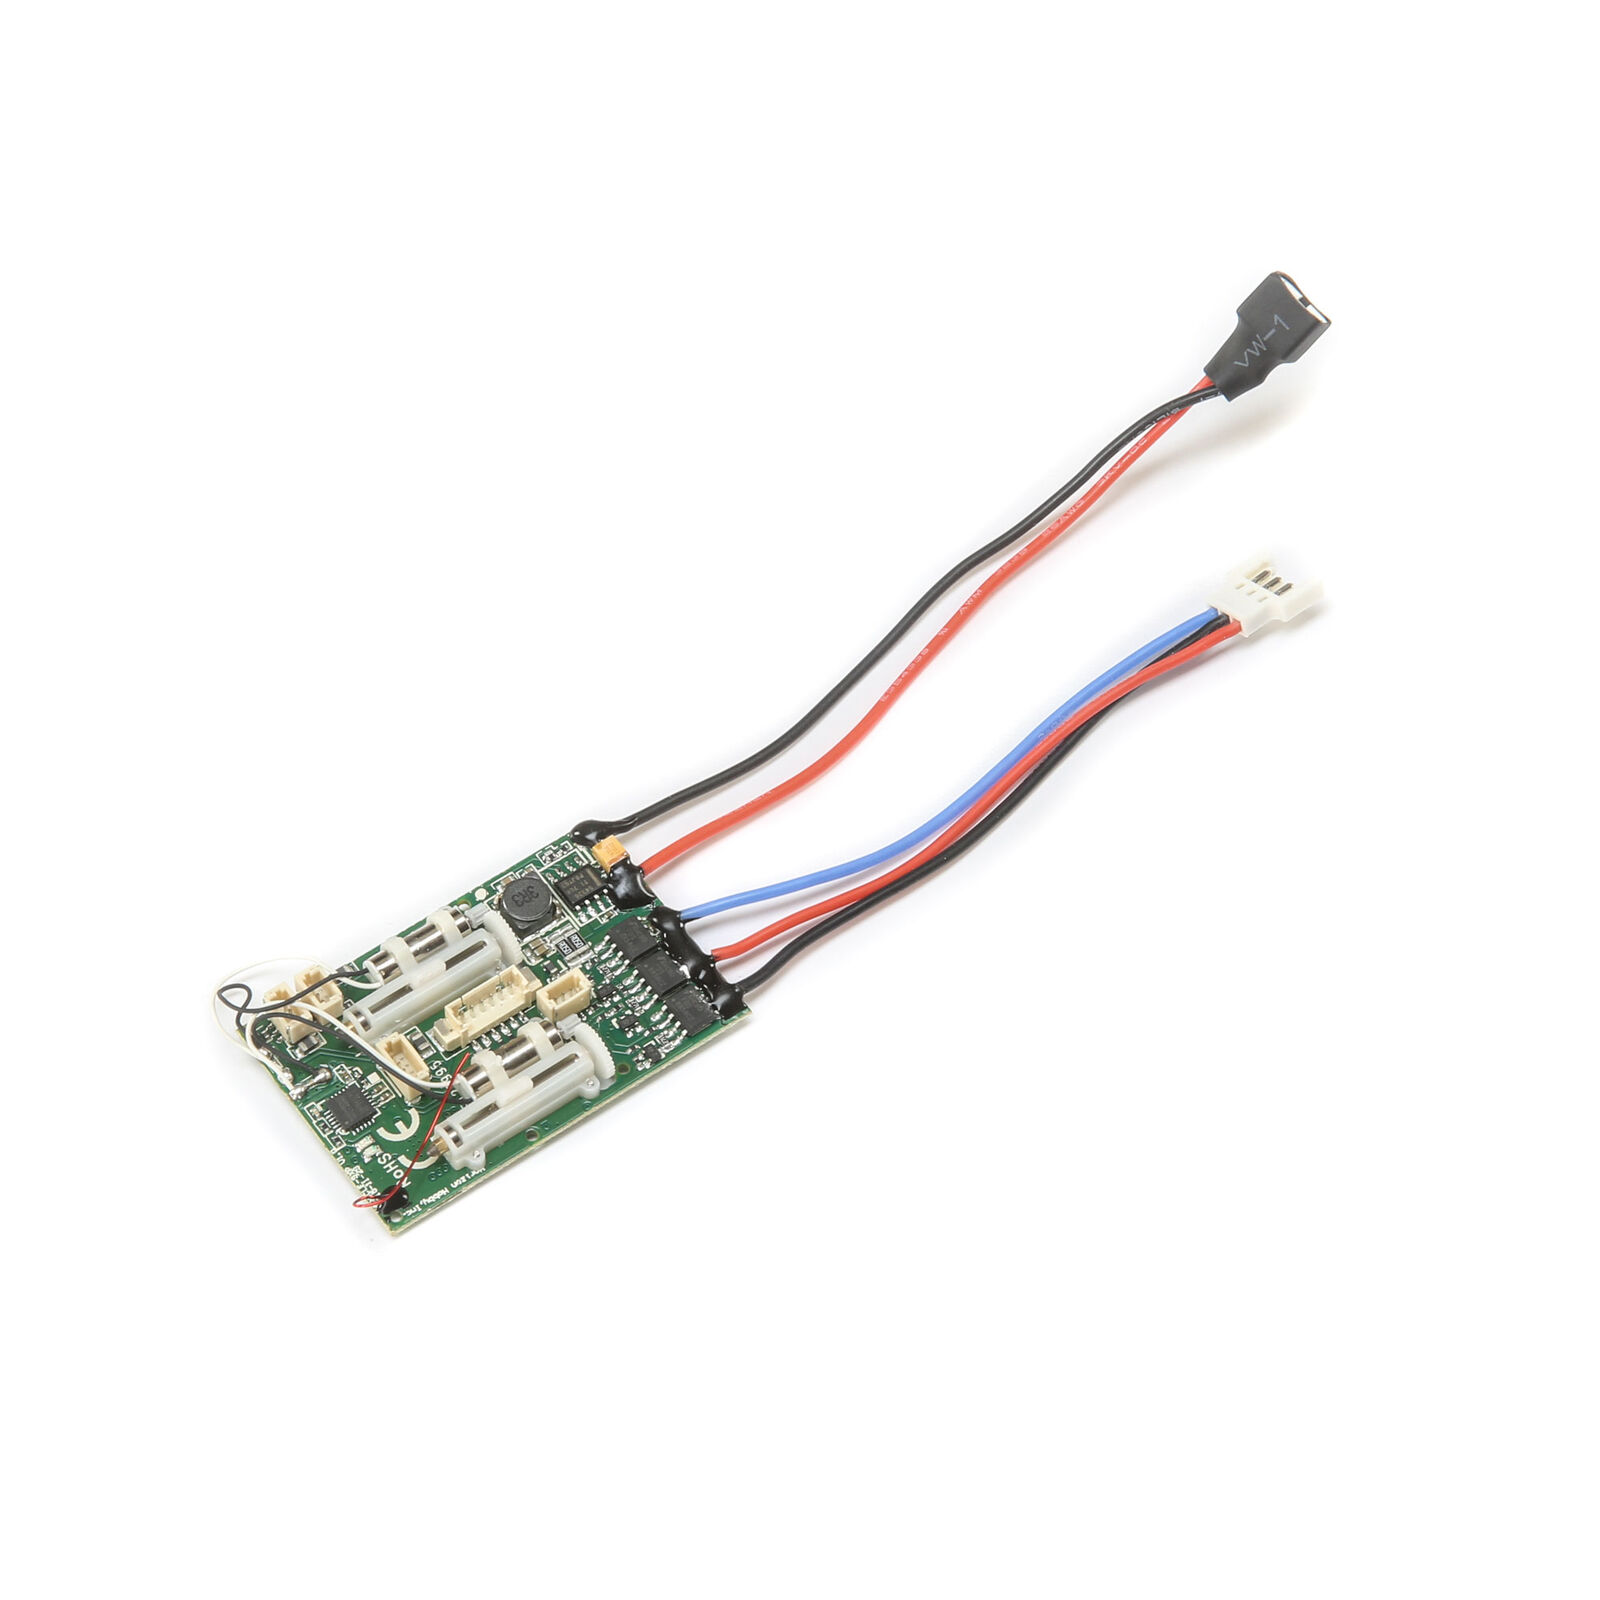 Receiver / Brushless ESC Unit with AS3X & SAFE: UMX Gee Bee